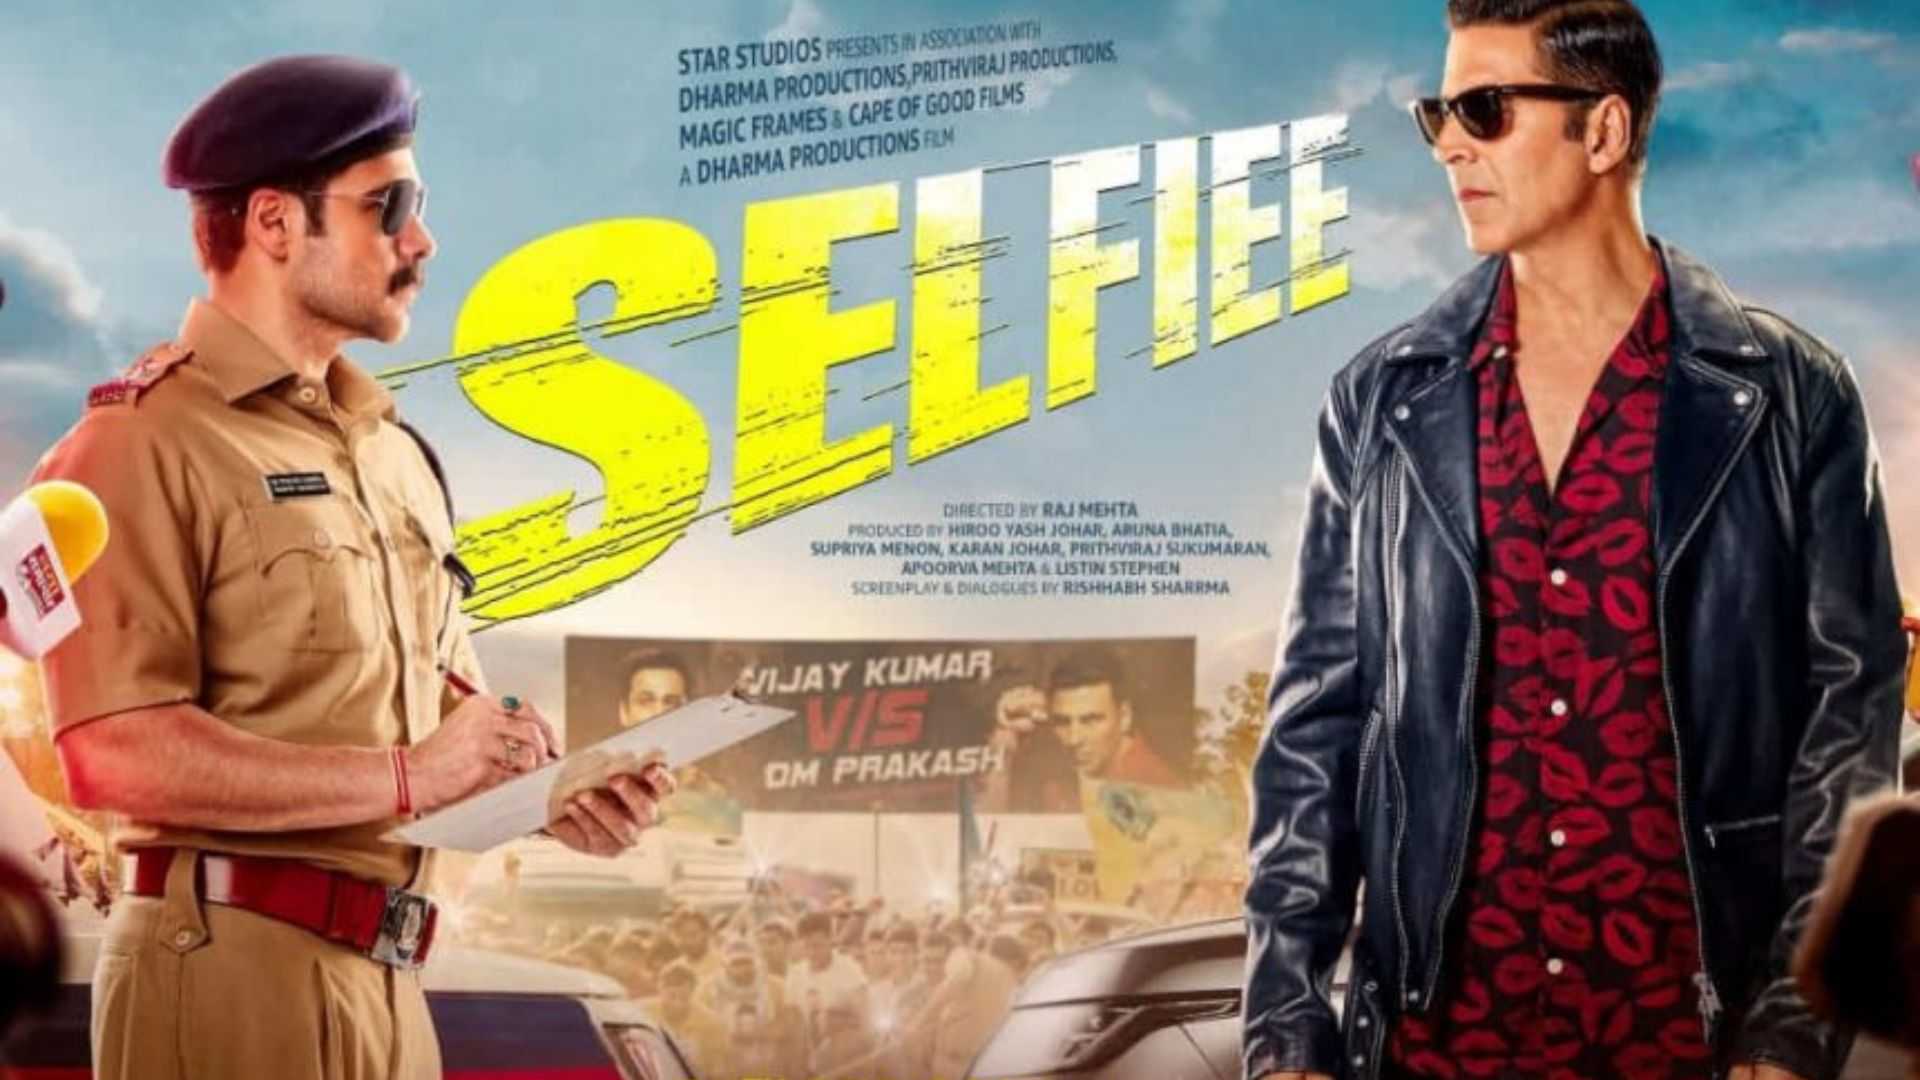 Akshay Kumar to have yet another flop on the way? His latest release Selfiee's advance bookings bear bad news